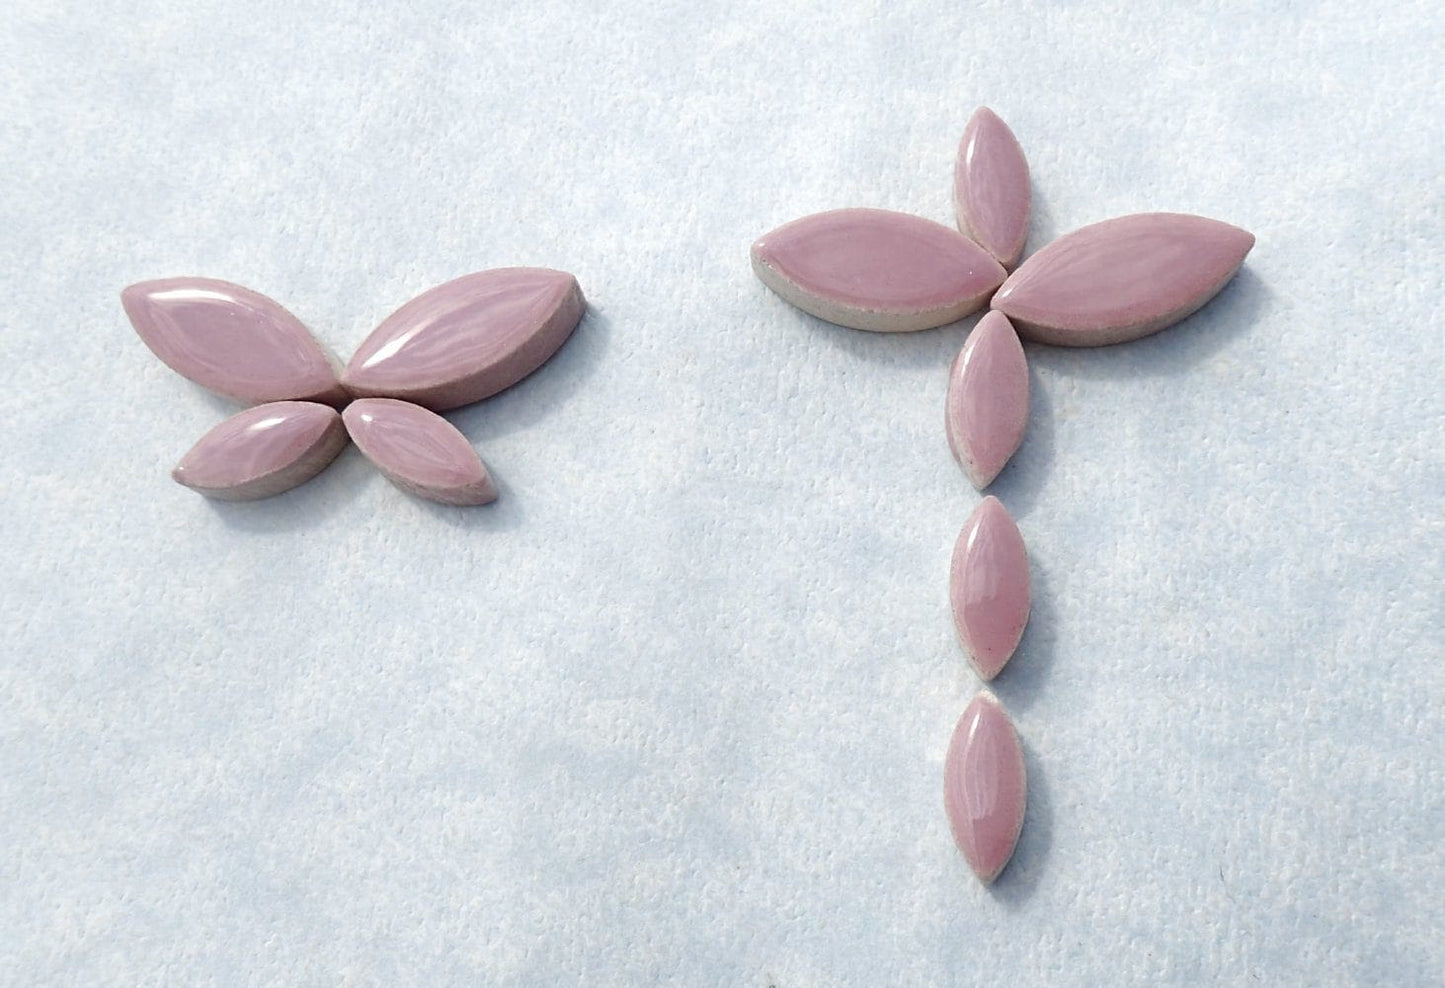 Lilac Petals Mosaic Tiles - 50g Ceramic Leaves in Mix of 2 Sizes 1/2" and 3/4"